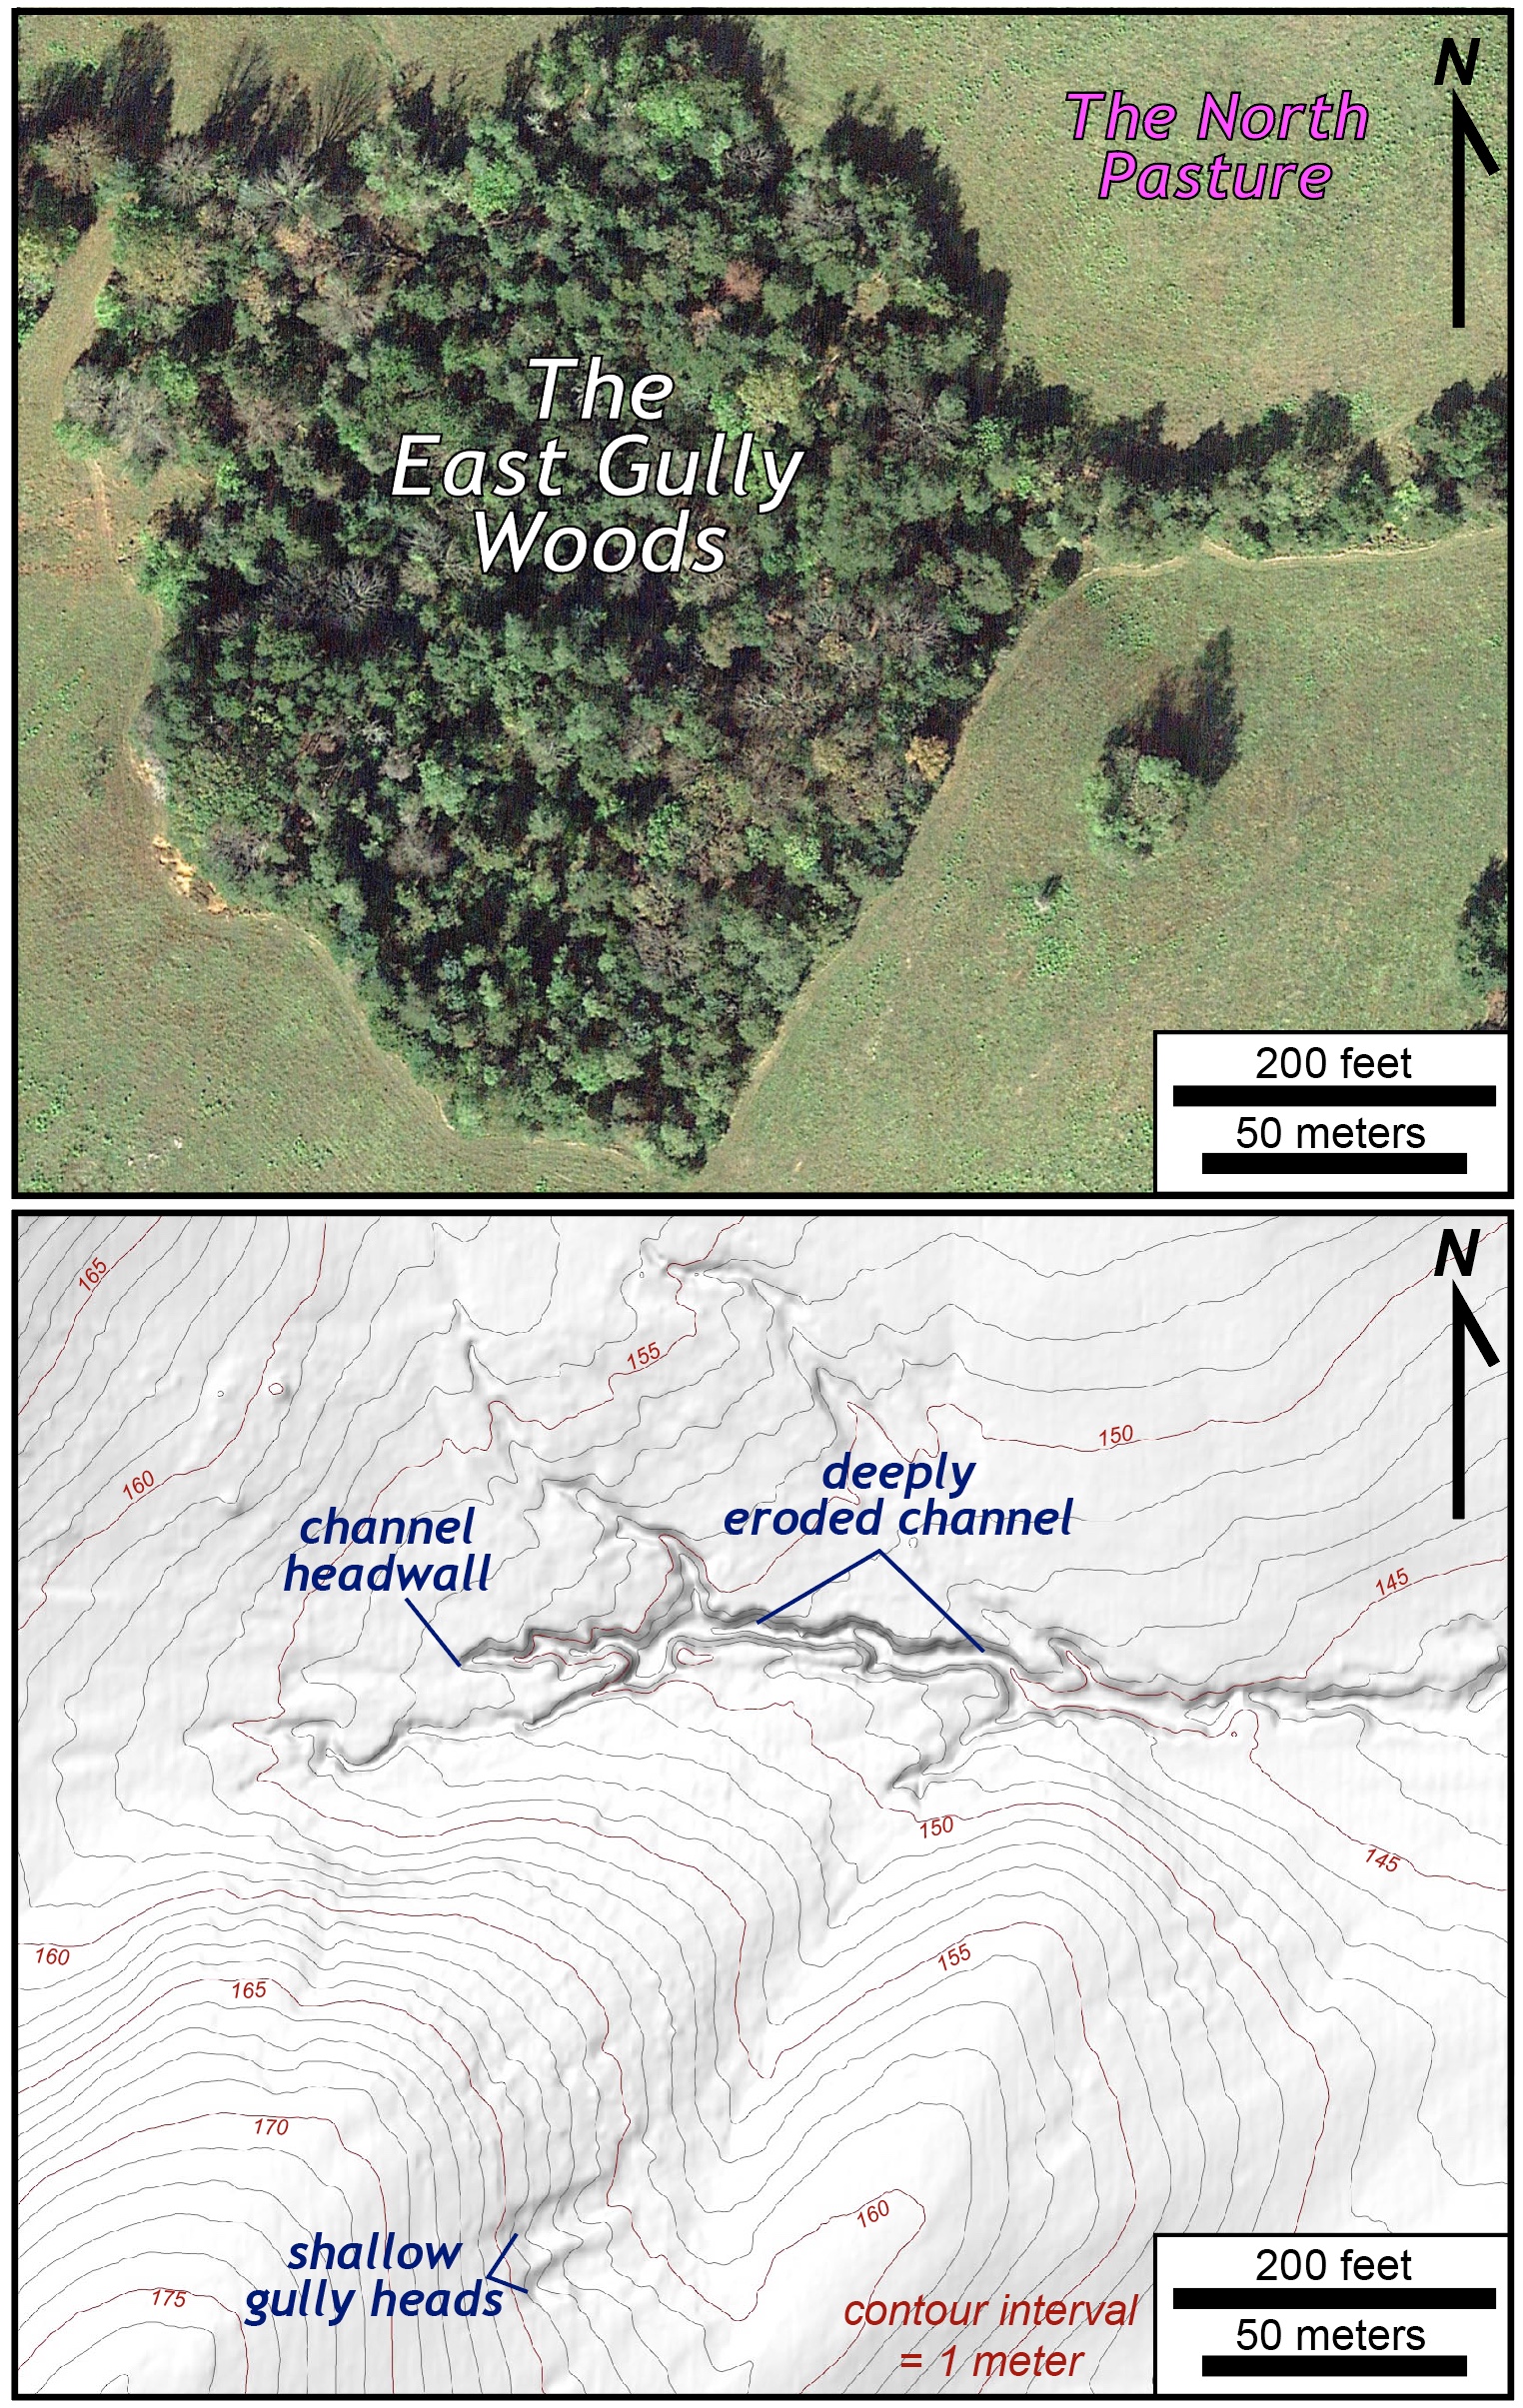 Aerial photo and topographic map of the East Gully. Identifiers include The East Gully Woods, channel headwall, deeply eroded channel and shallow gully heads